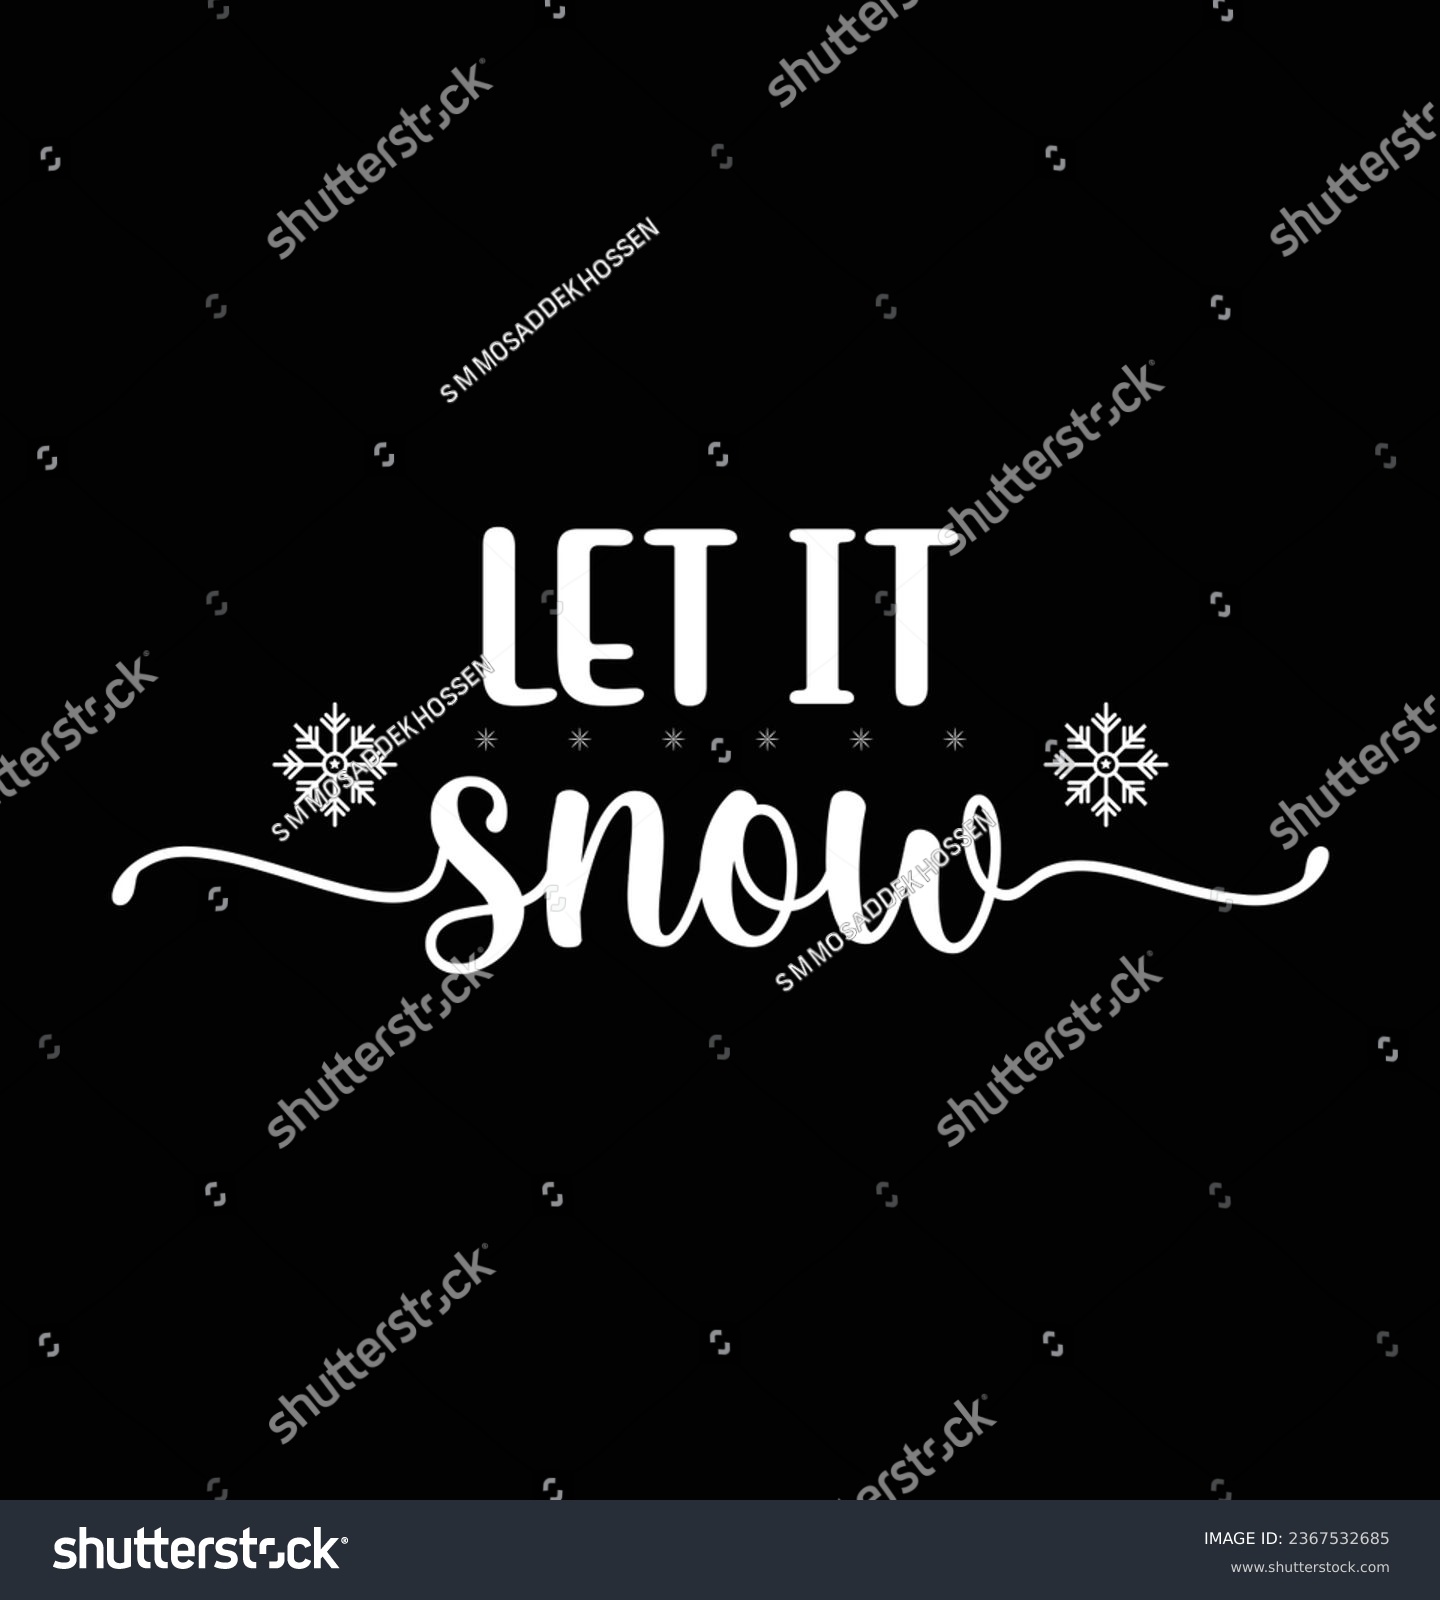 SVG of Let It Snow Lettering With Snowflake Design svg